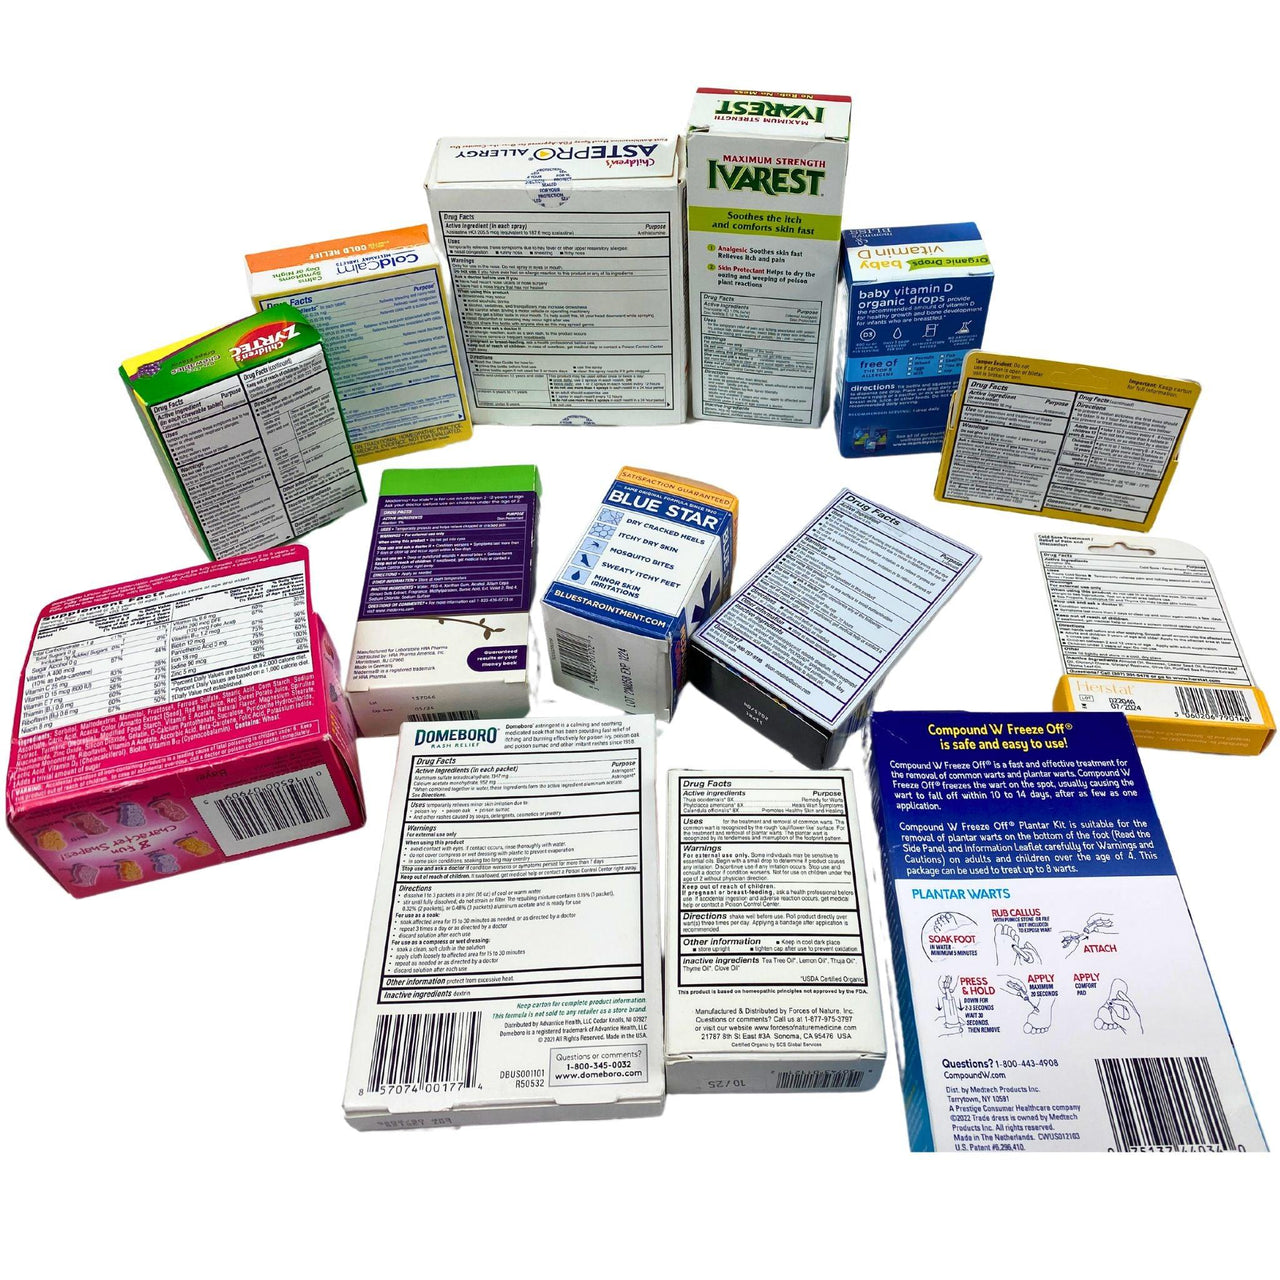 DWI Meds Mix - Includes Medication for Everything Adults & Kids (200 Pcs Lot) - Discount Wholesalers Inc